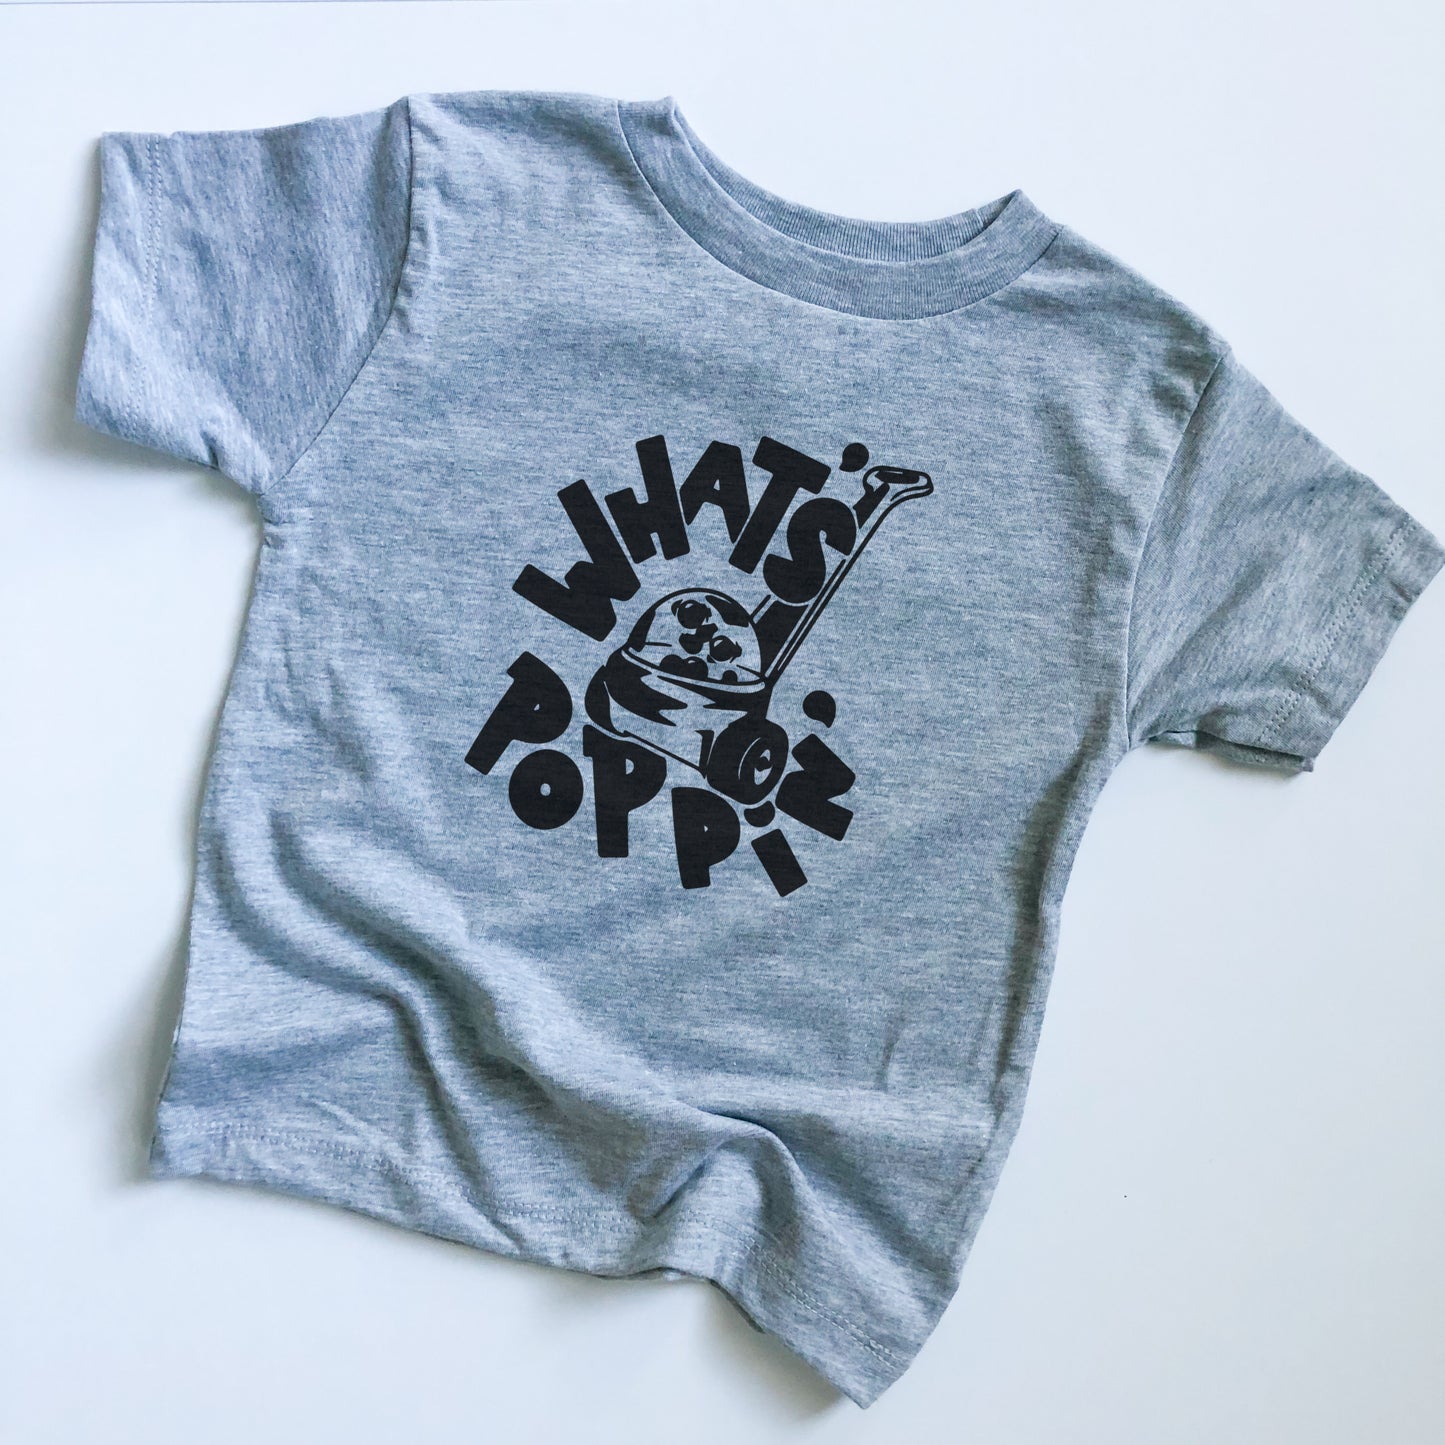 What's Poppin' Toddler Short Sleeve Tee